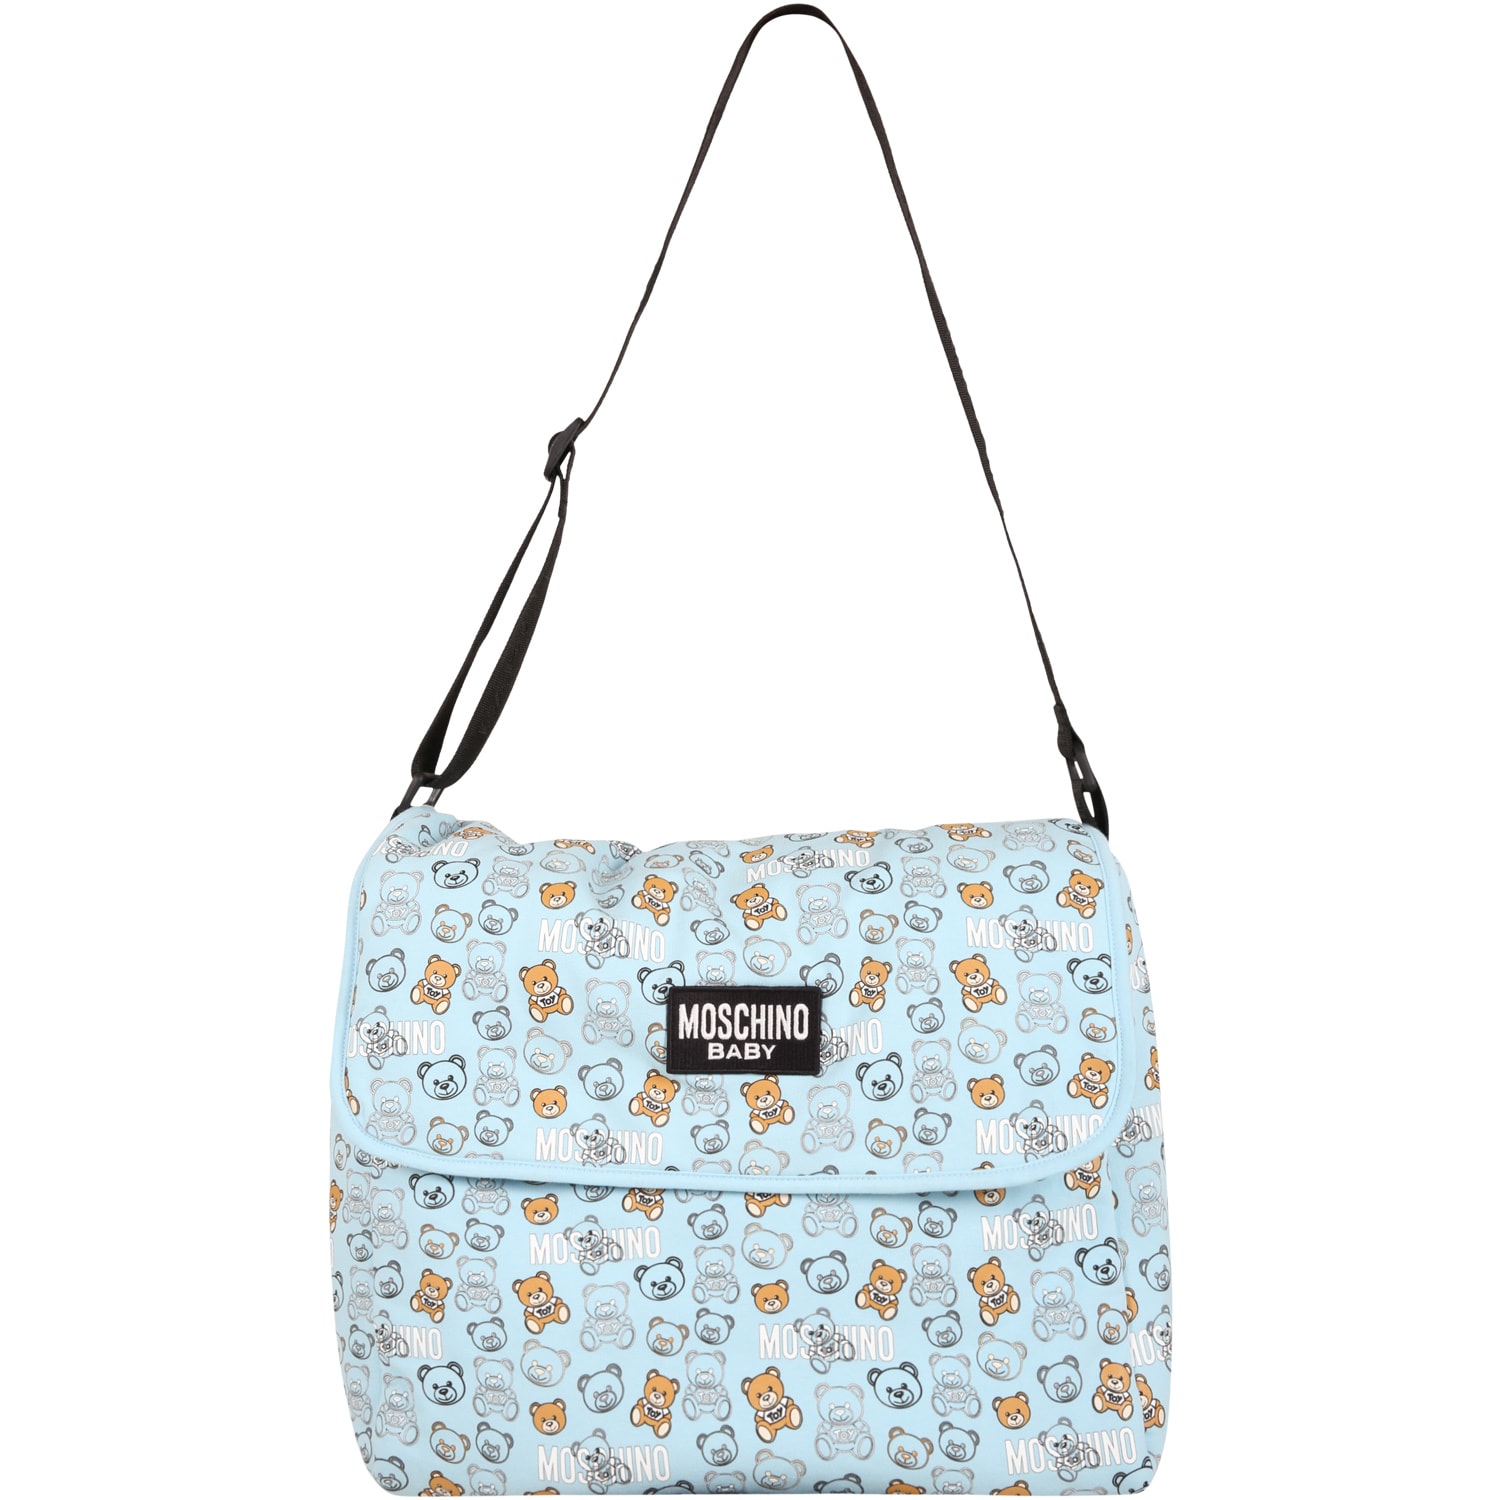 Moschino Light Blue Changing Bag For Baby With Teddy Bears